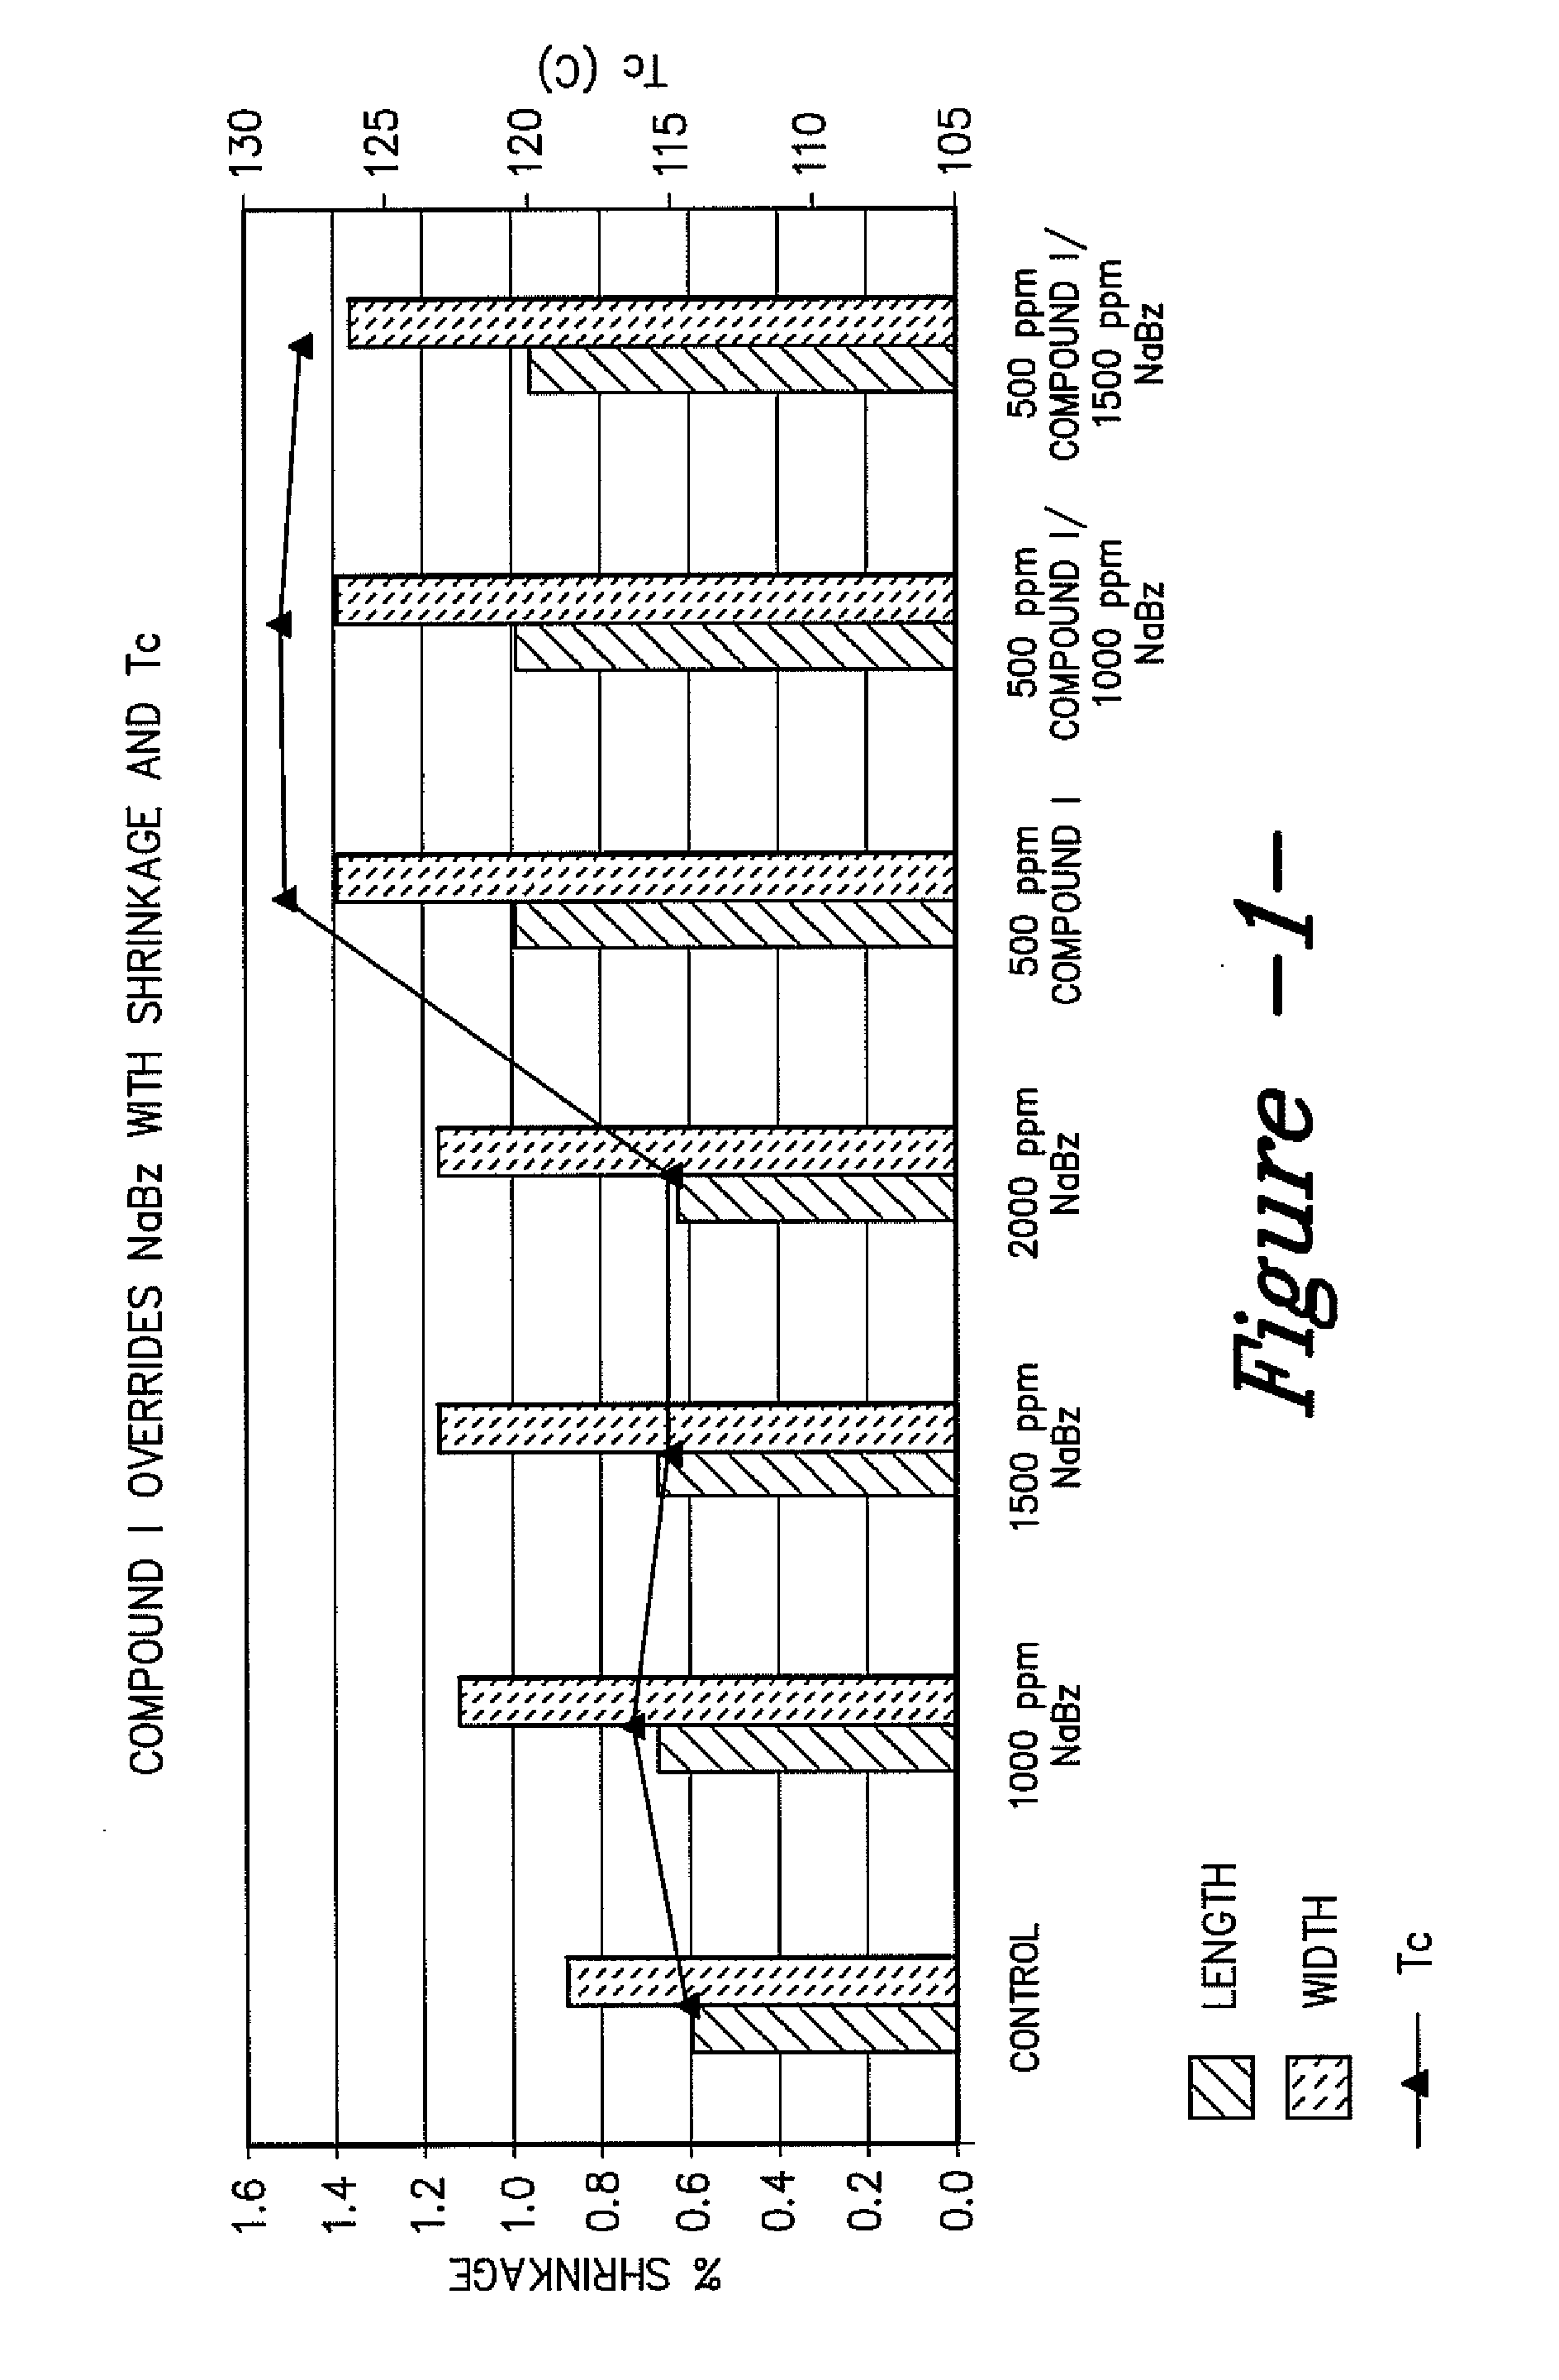 Nucleating agent additive compositions and methods